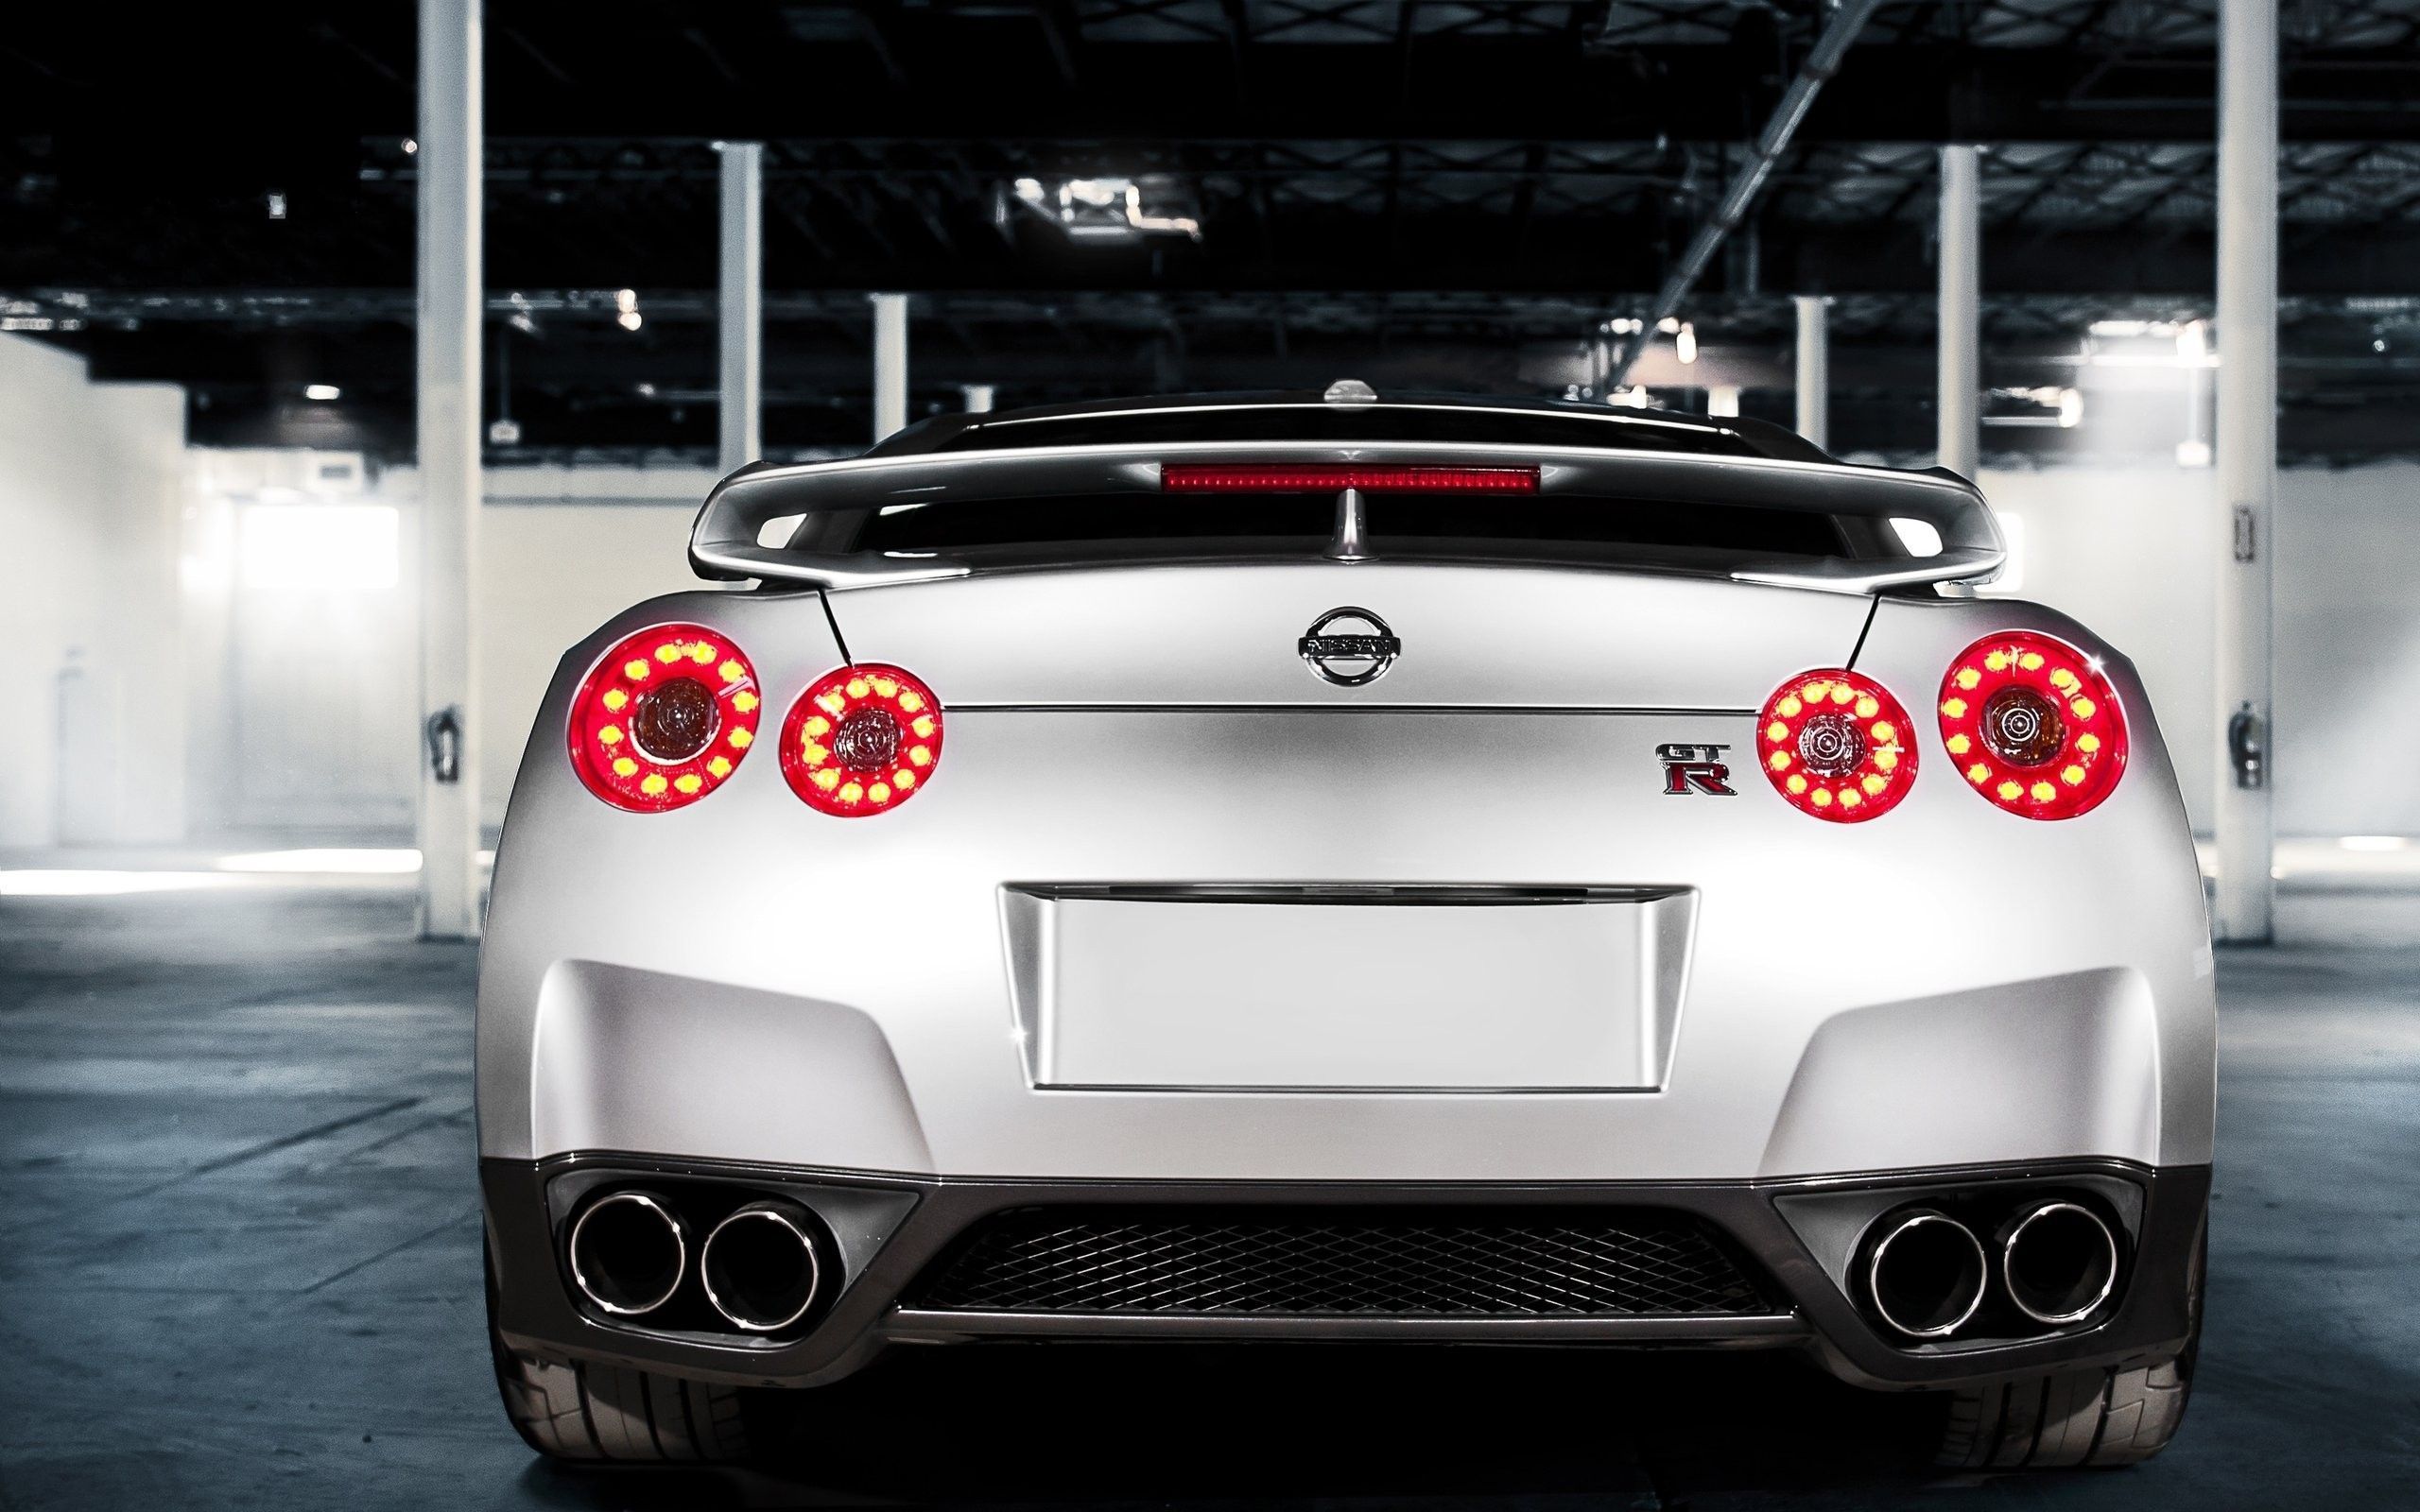 r35 wallpapers | WallpaperUP